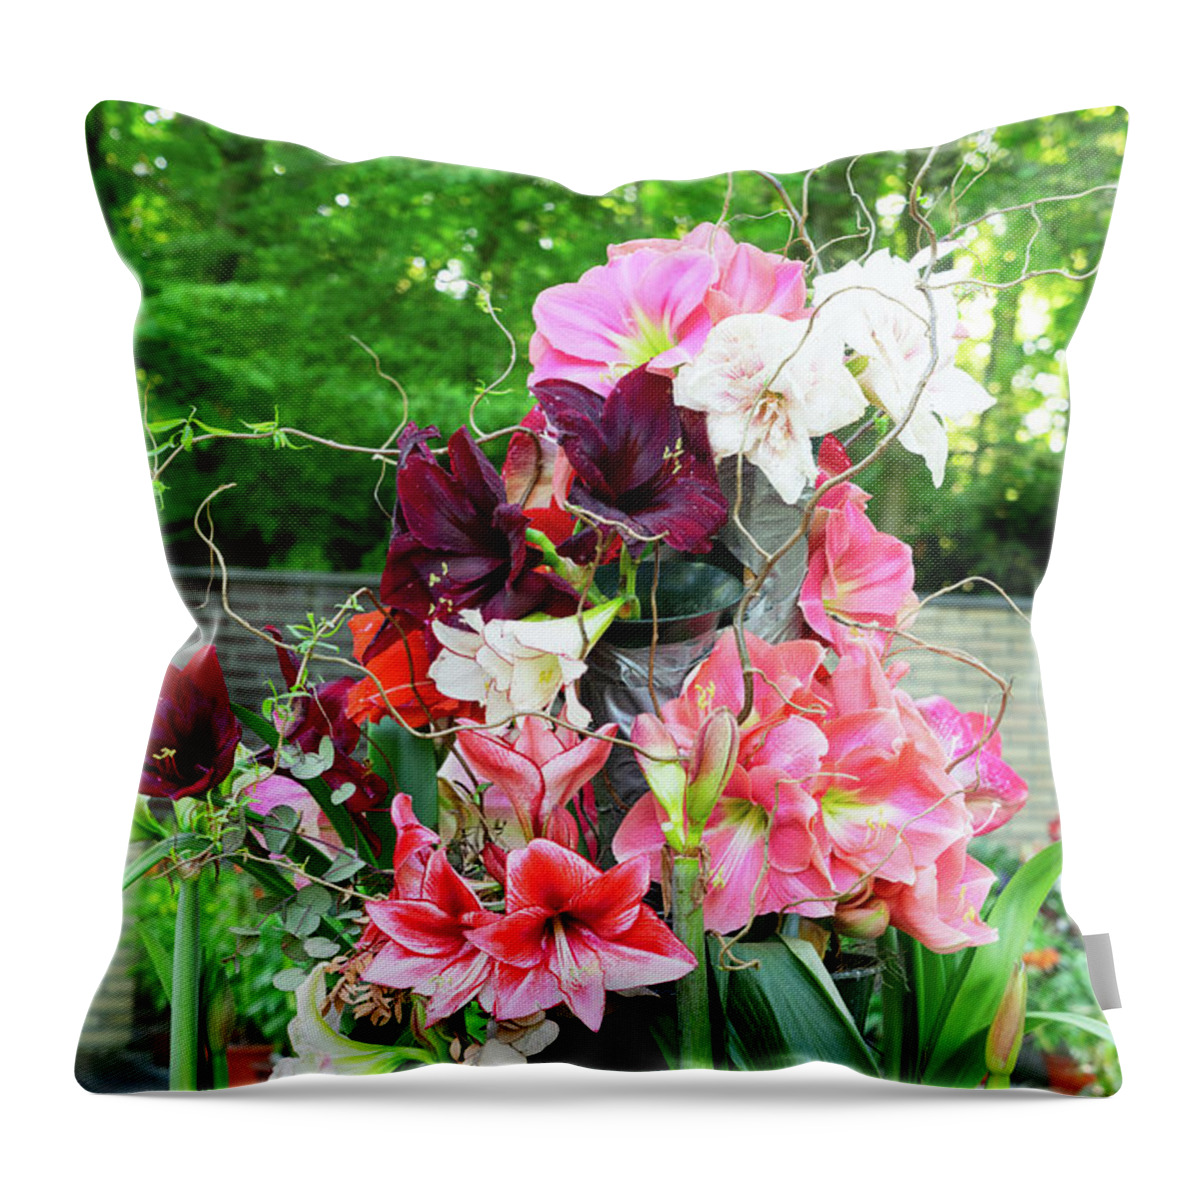 Arrangement Throw Pillow featuring the photograph Amaryllis Hippeastrum flowers by Anastasy Yarmolovich